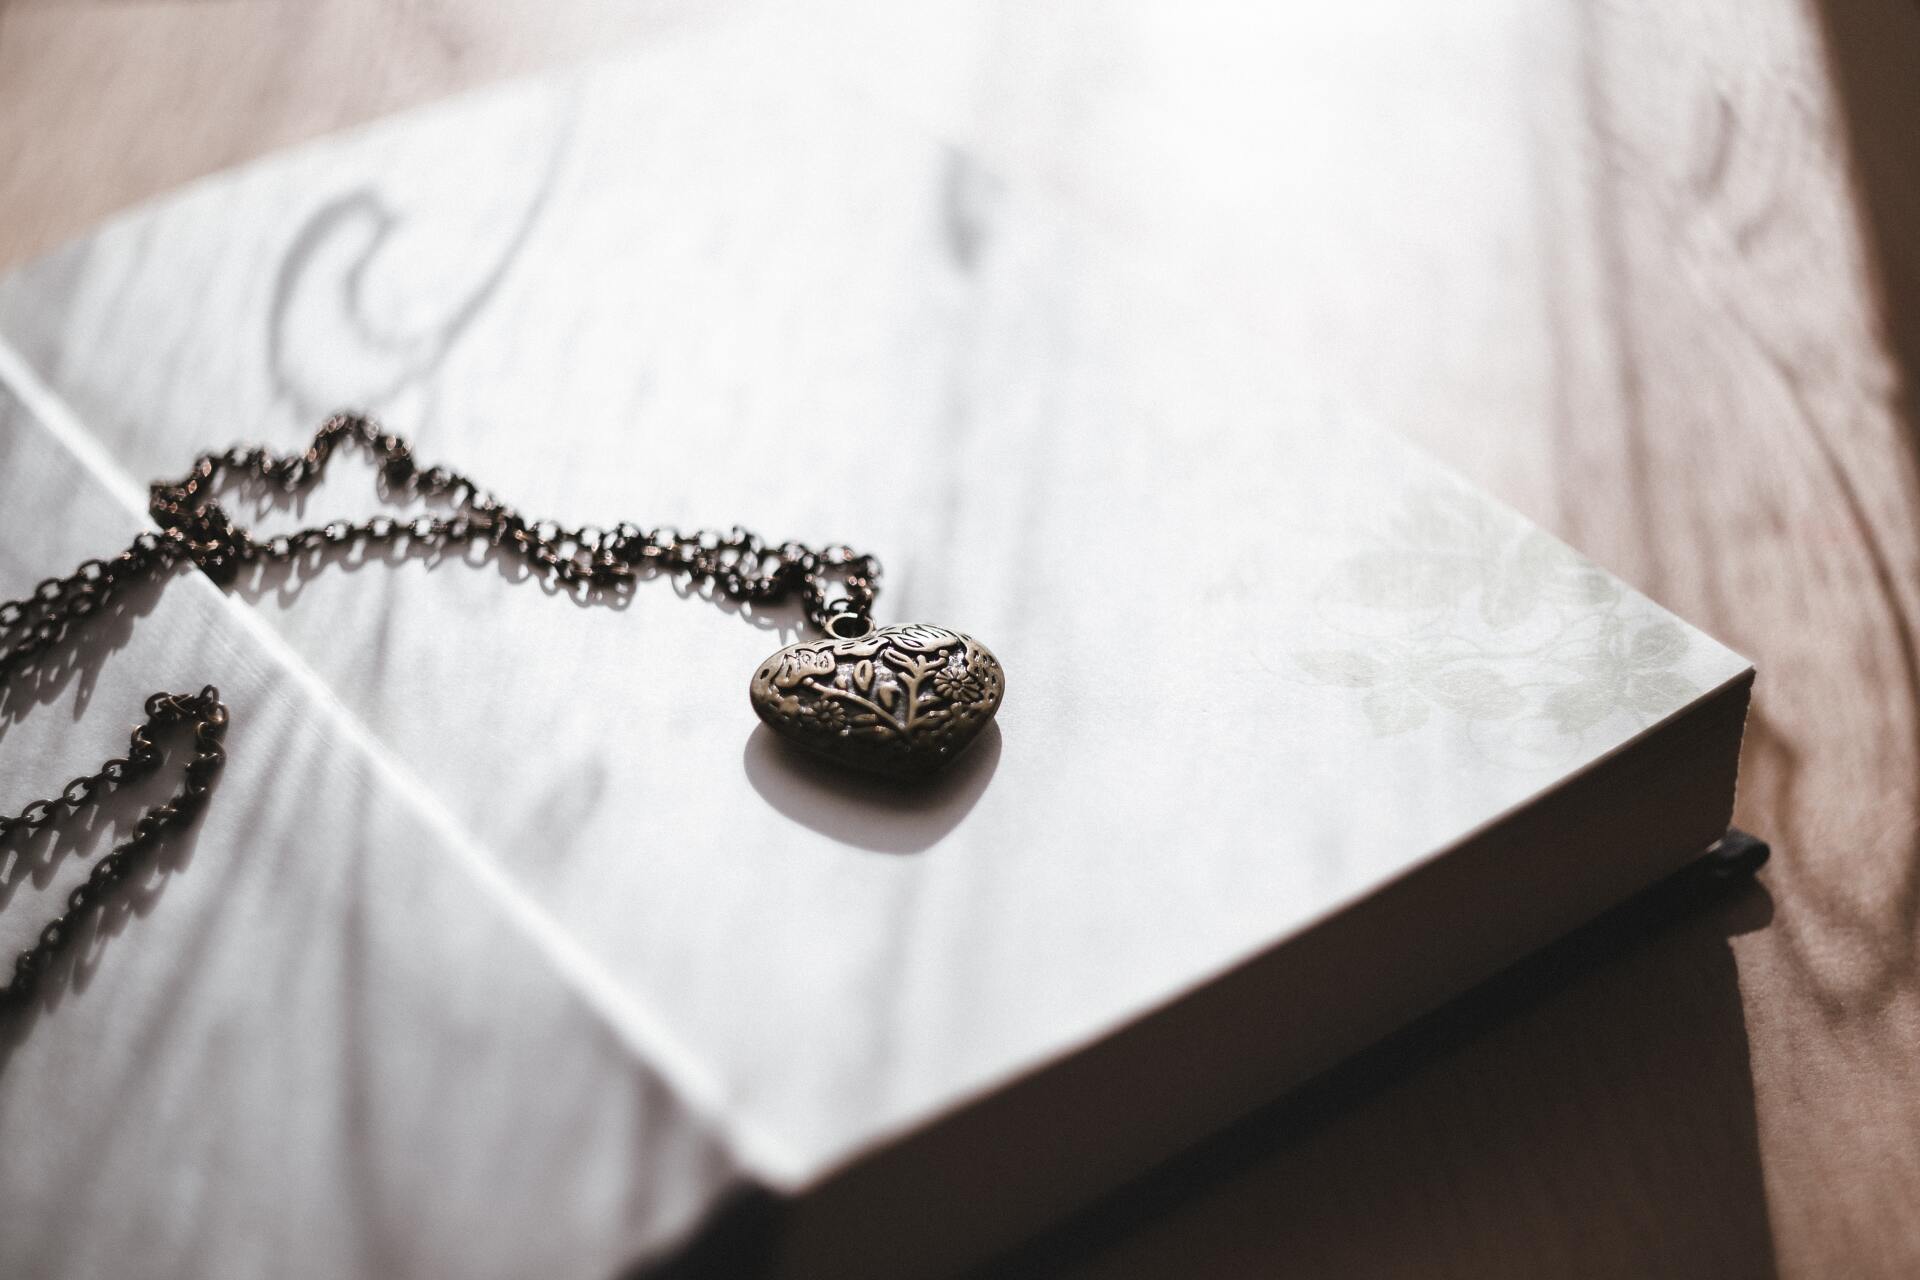 cremation services necklace locket on book